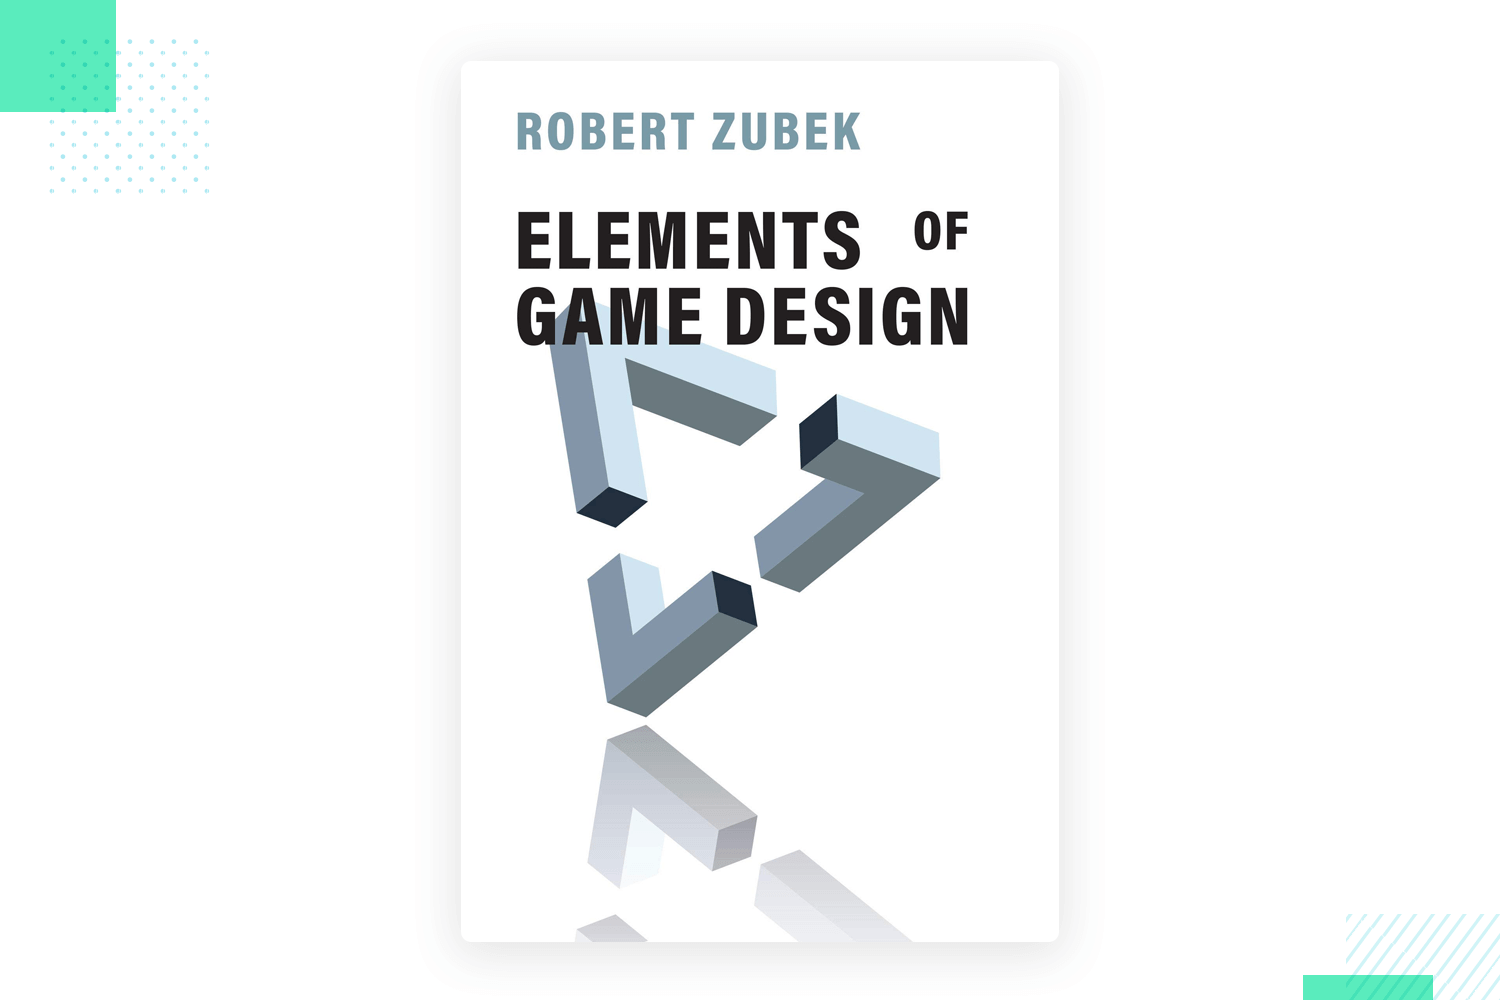 elements of game design as book for ui designers